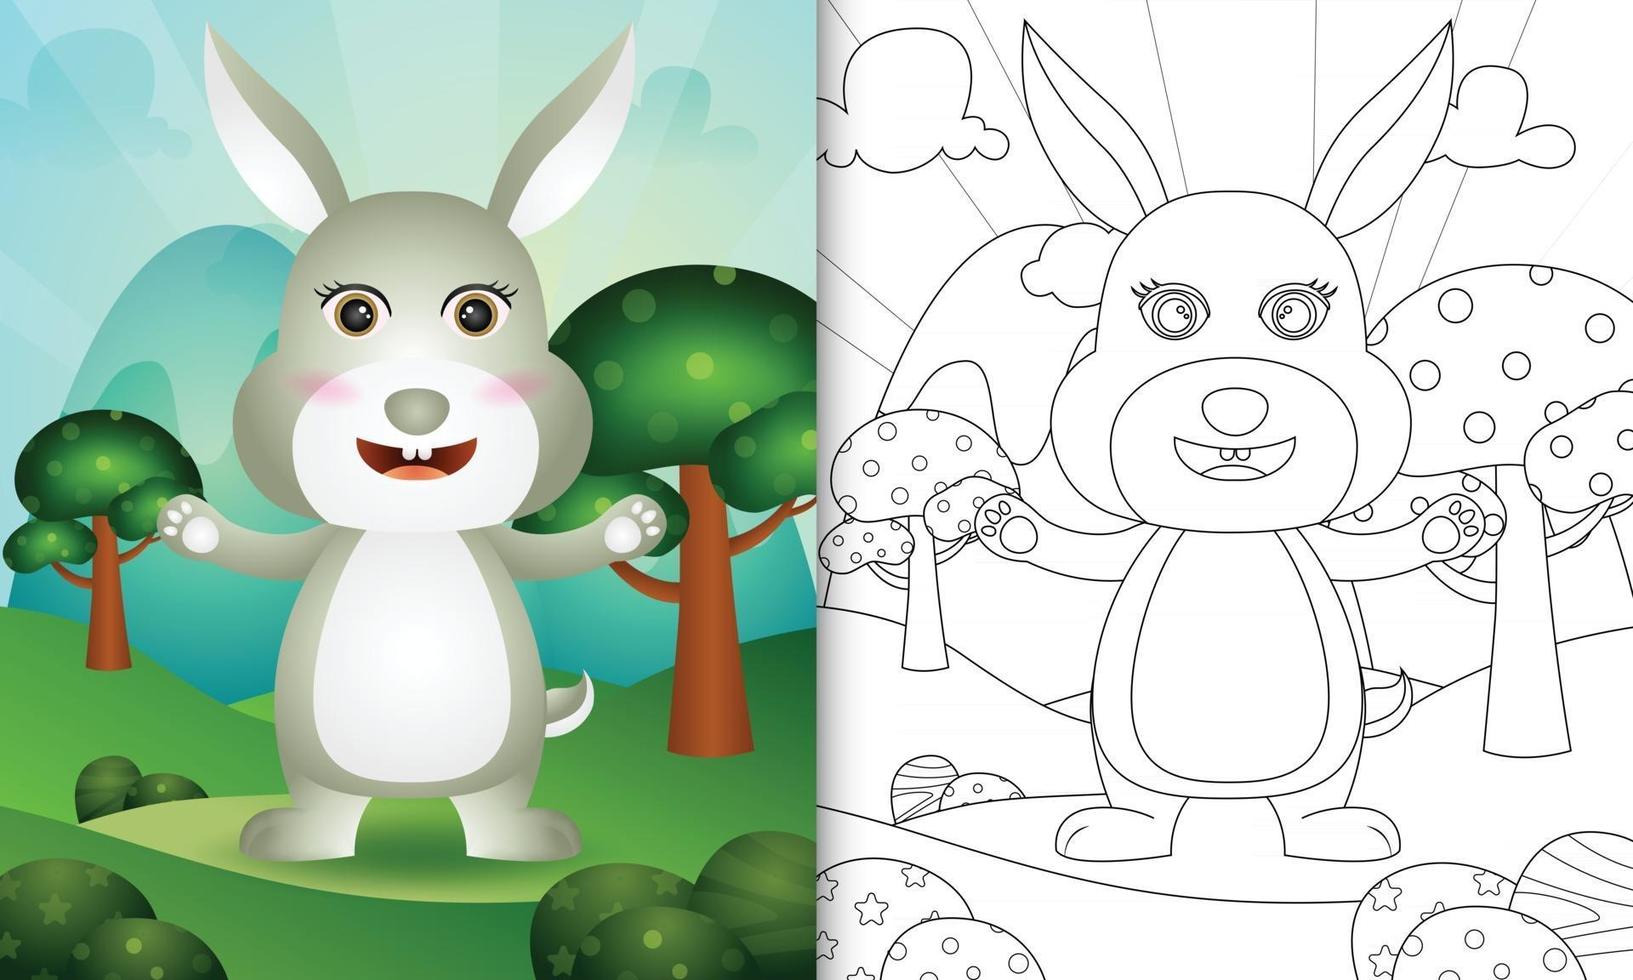 coloring book for kids with a cute rabbit character illustration vector